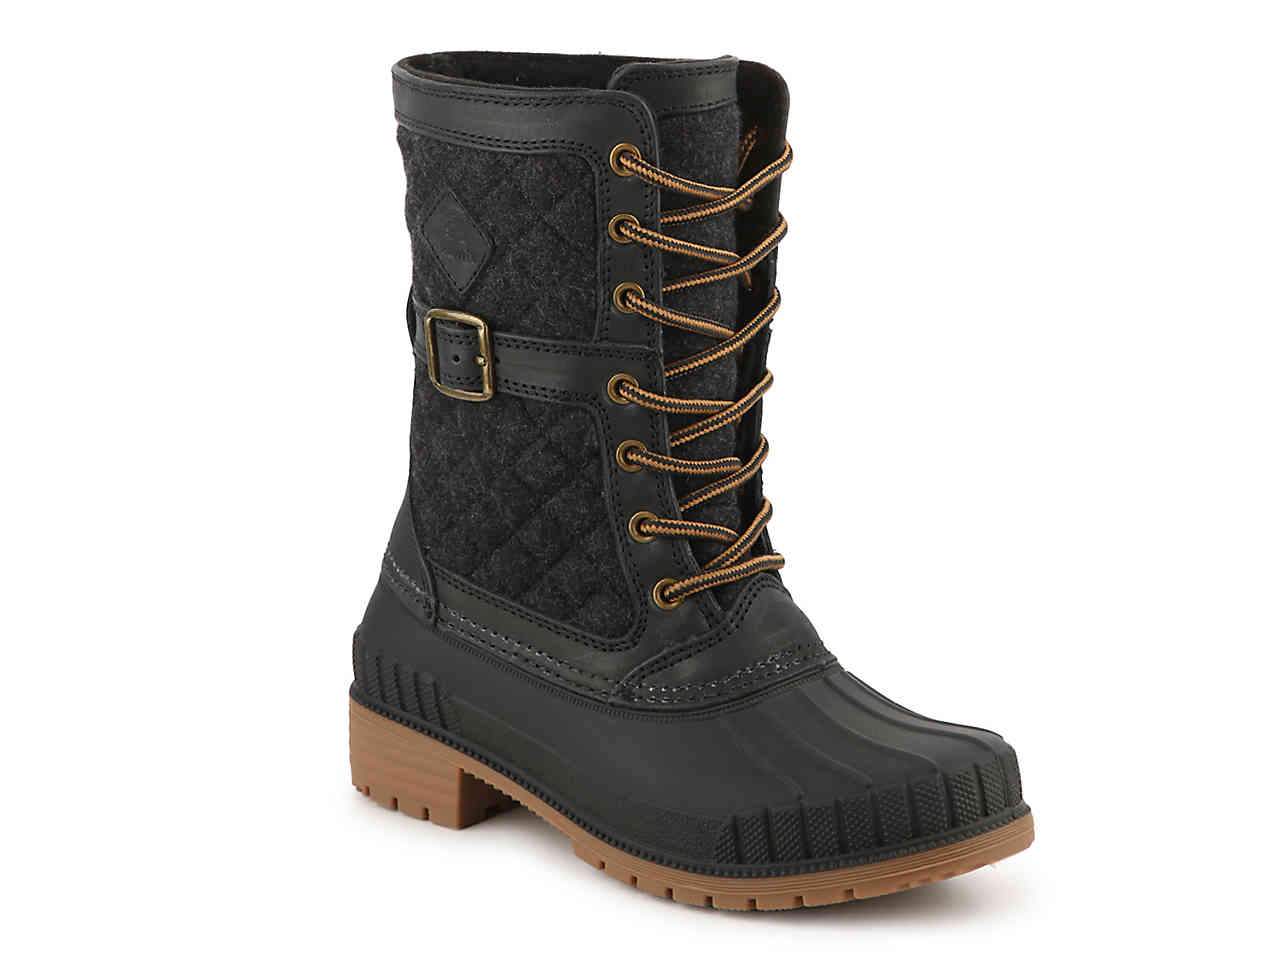 Top 7 Types of Boots to Wear in Winter Season